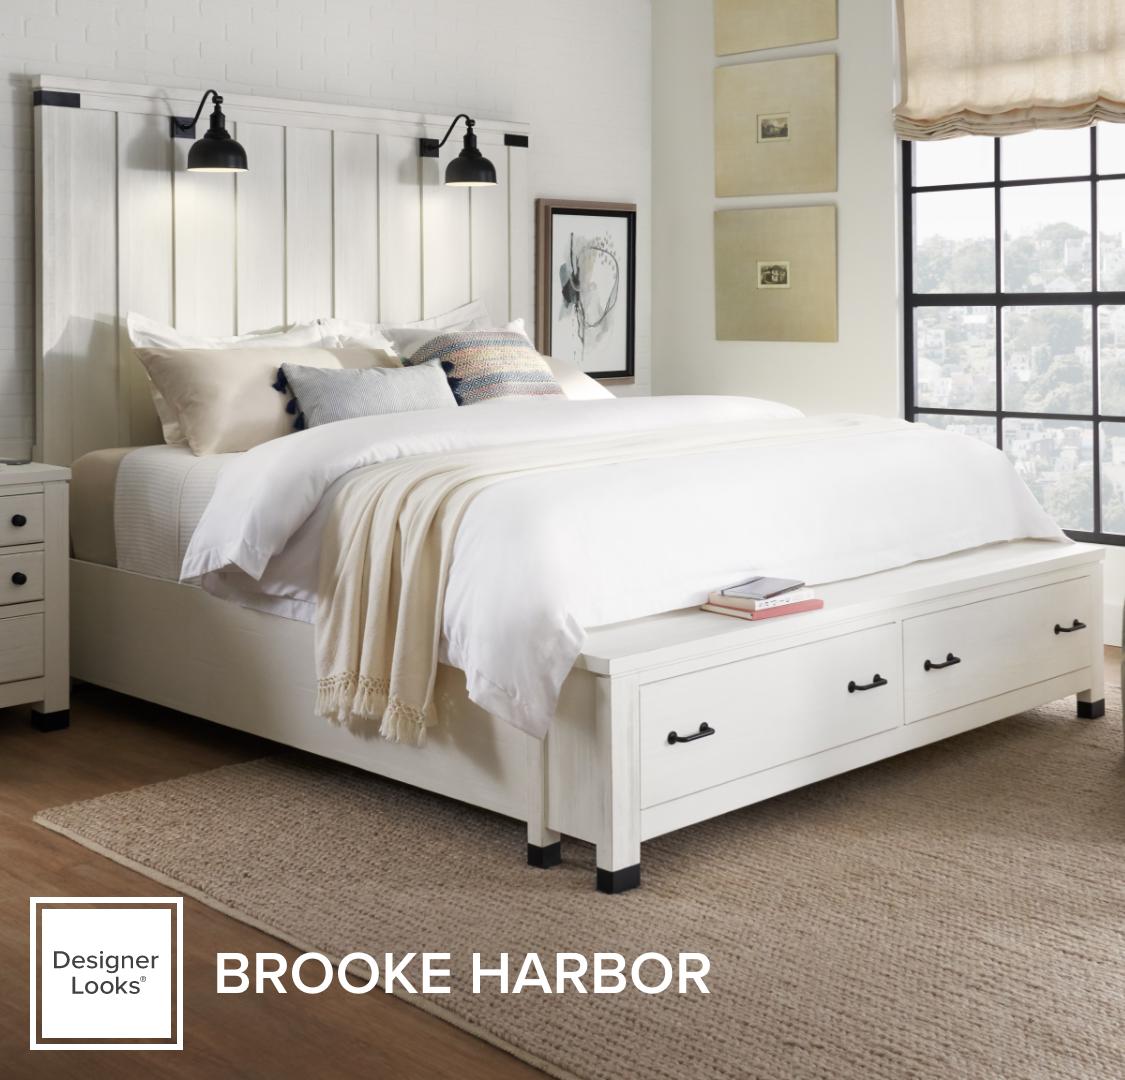 The Brooke Harbor Collection